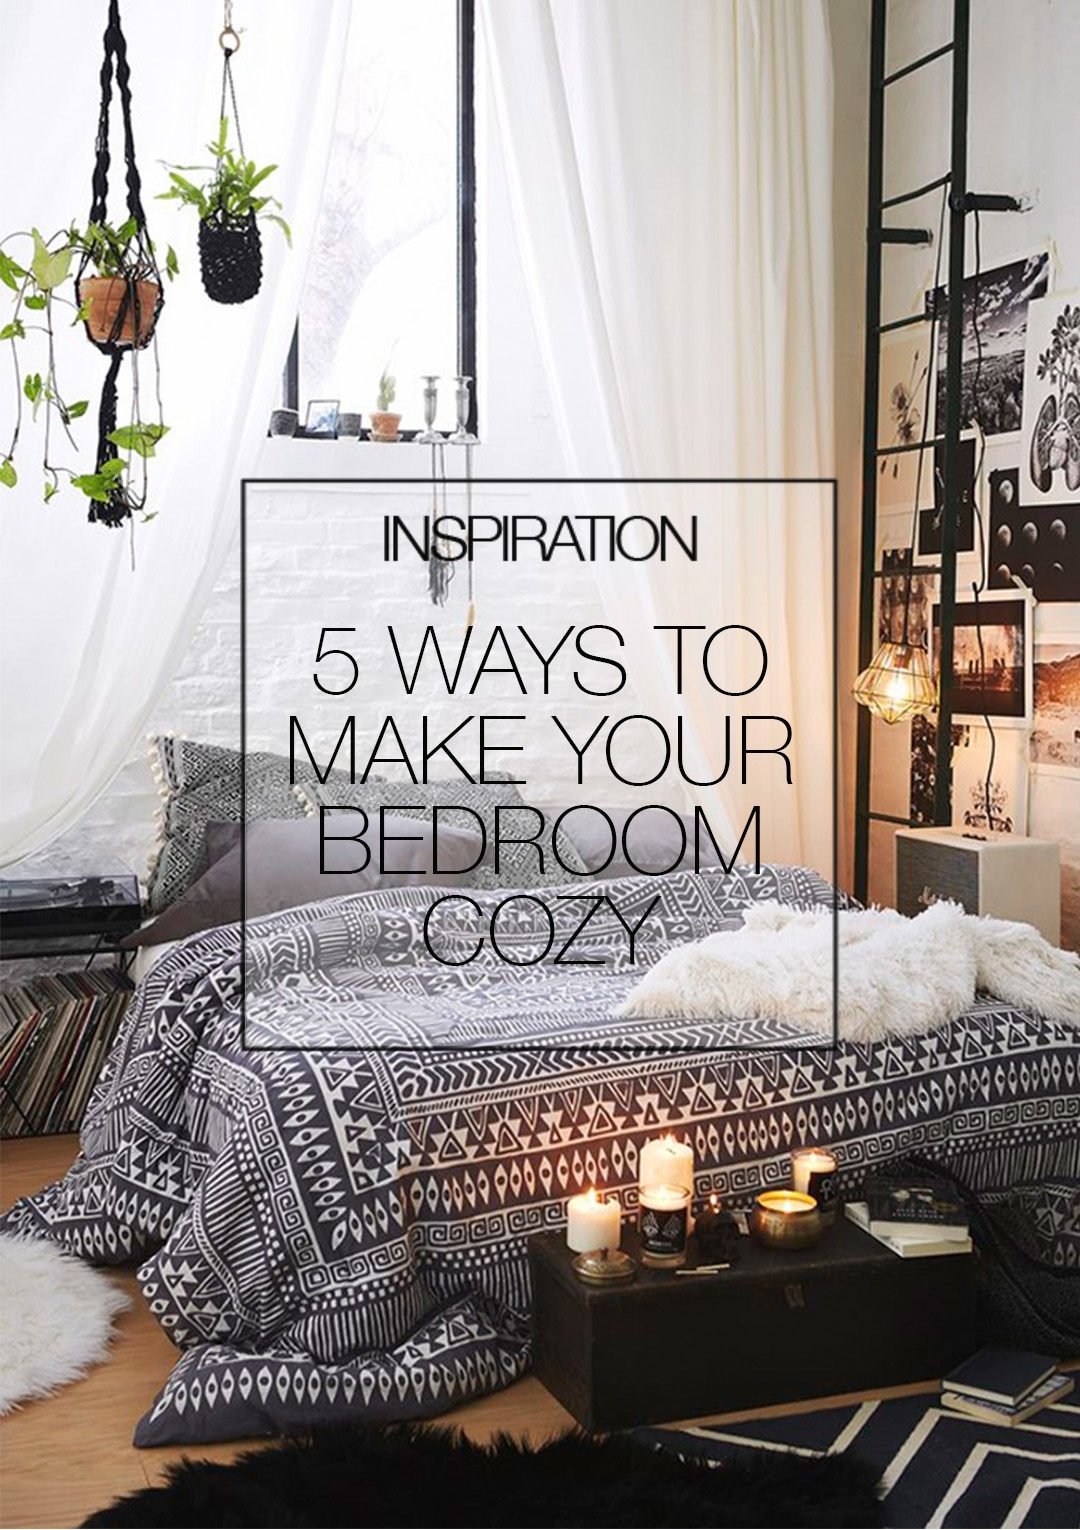 10 Elegant Ideas To Spice Up The Bedroom spice up the bedroom ideas internetunblock internetunblock 2 2022